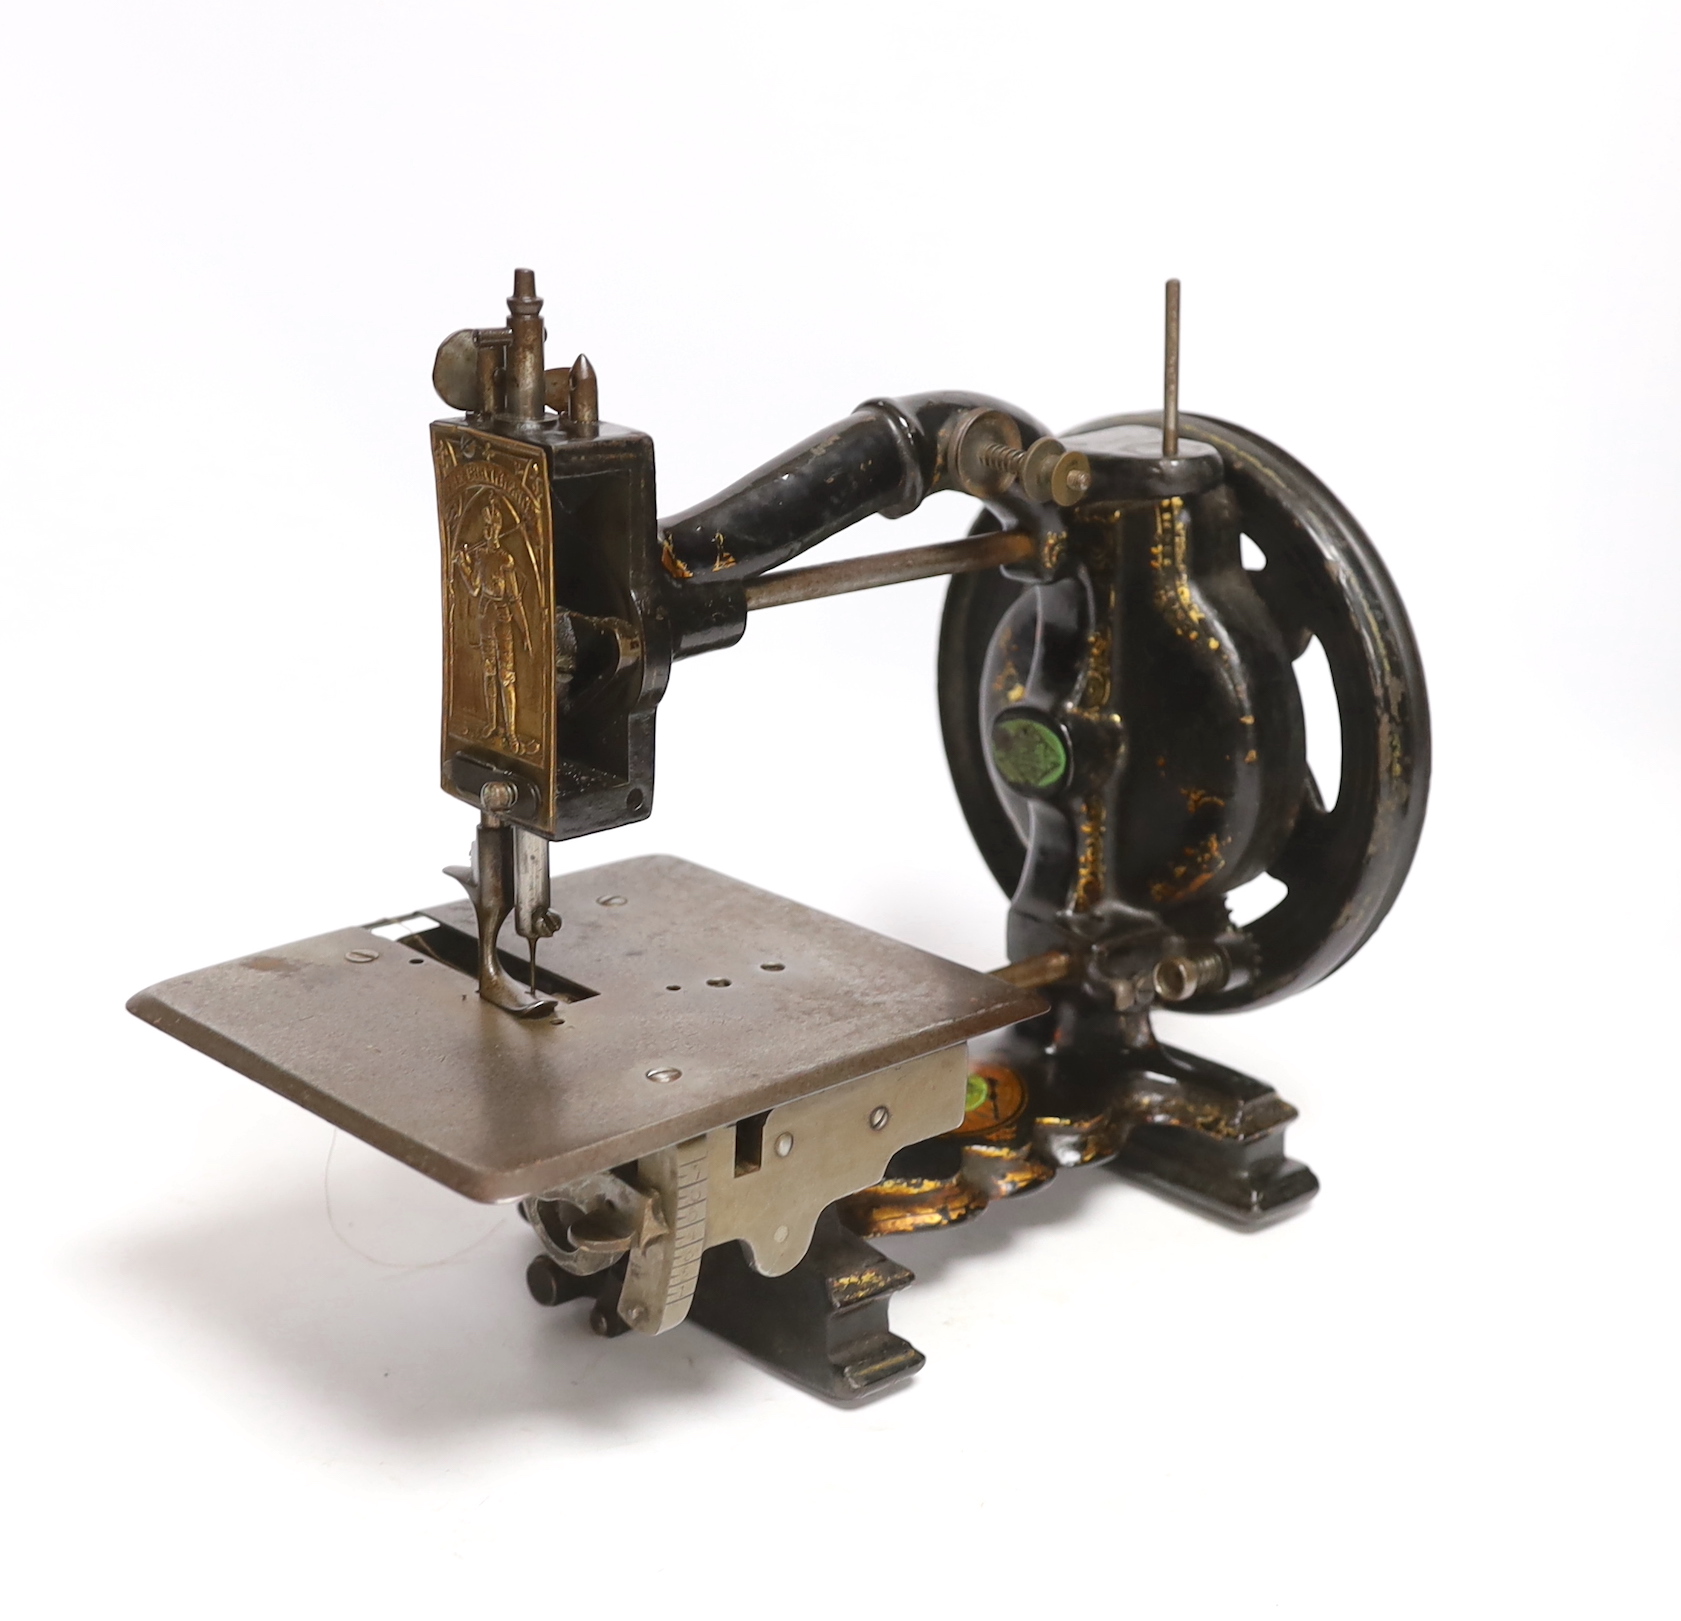 An 1870s Imperial Sewing Machine Co. Challenge model with box                                                                                                                                                               